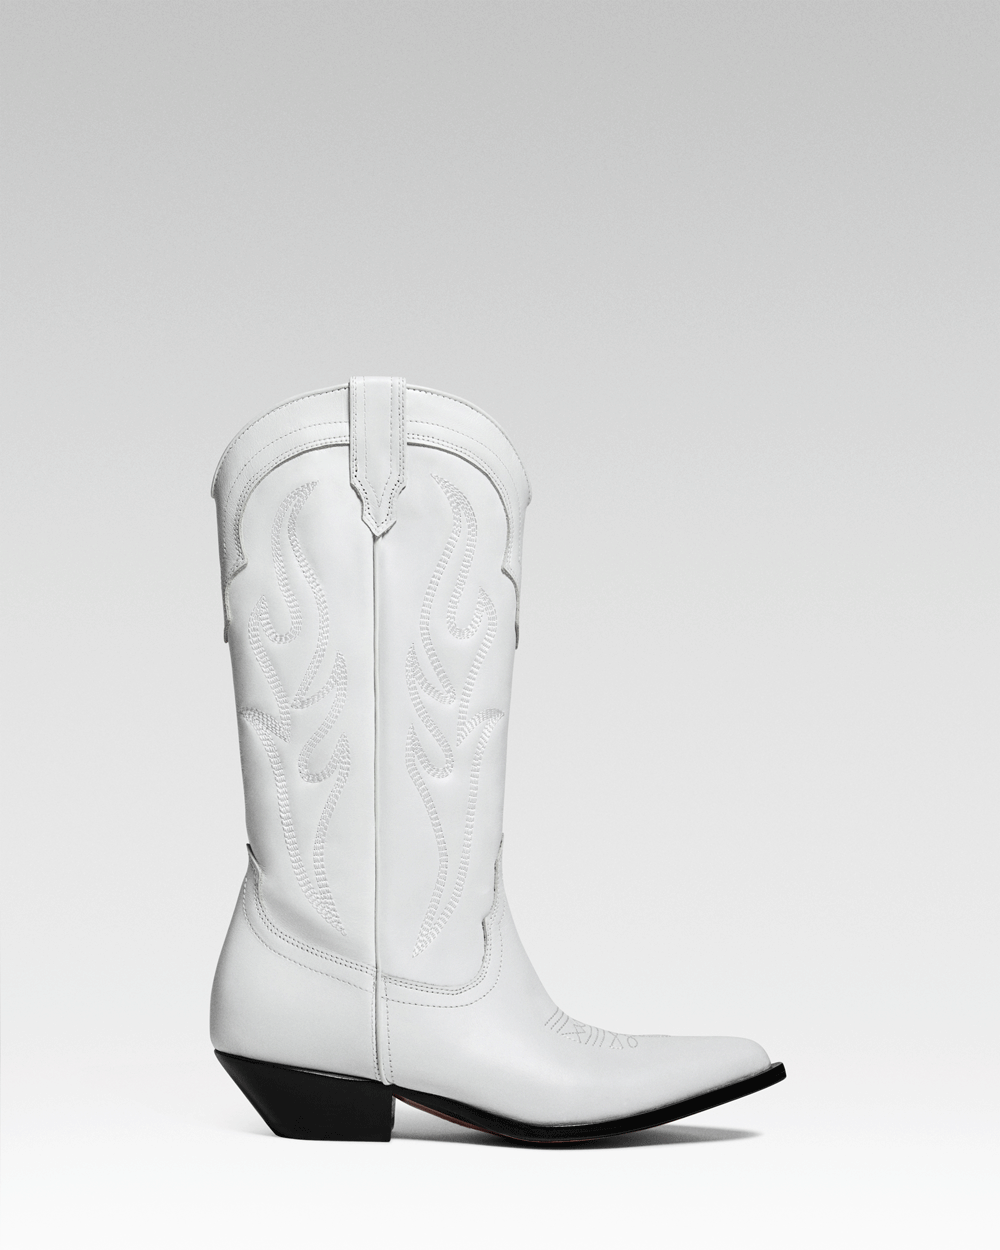 SANTA FE Women's Cowboy Boots in White Calfskin | On tone embroidery